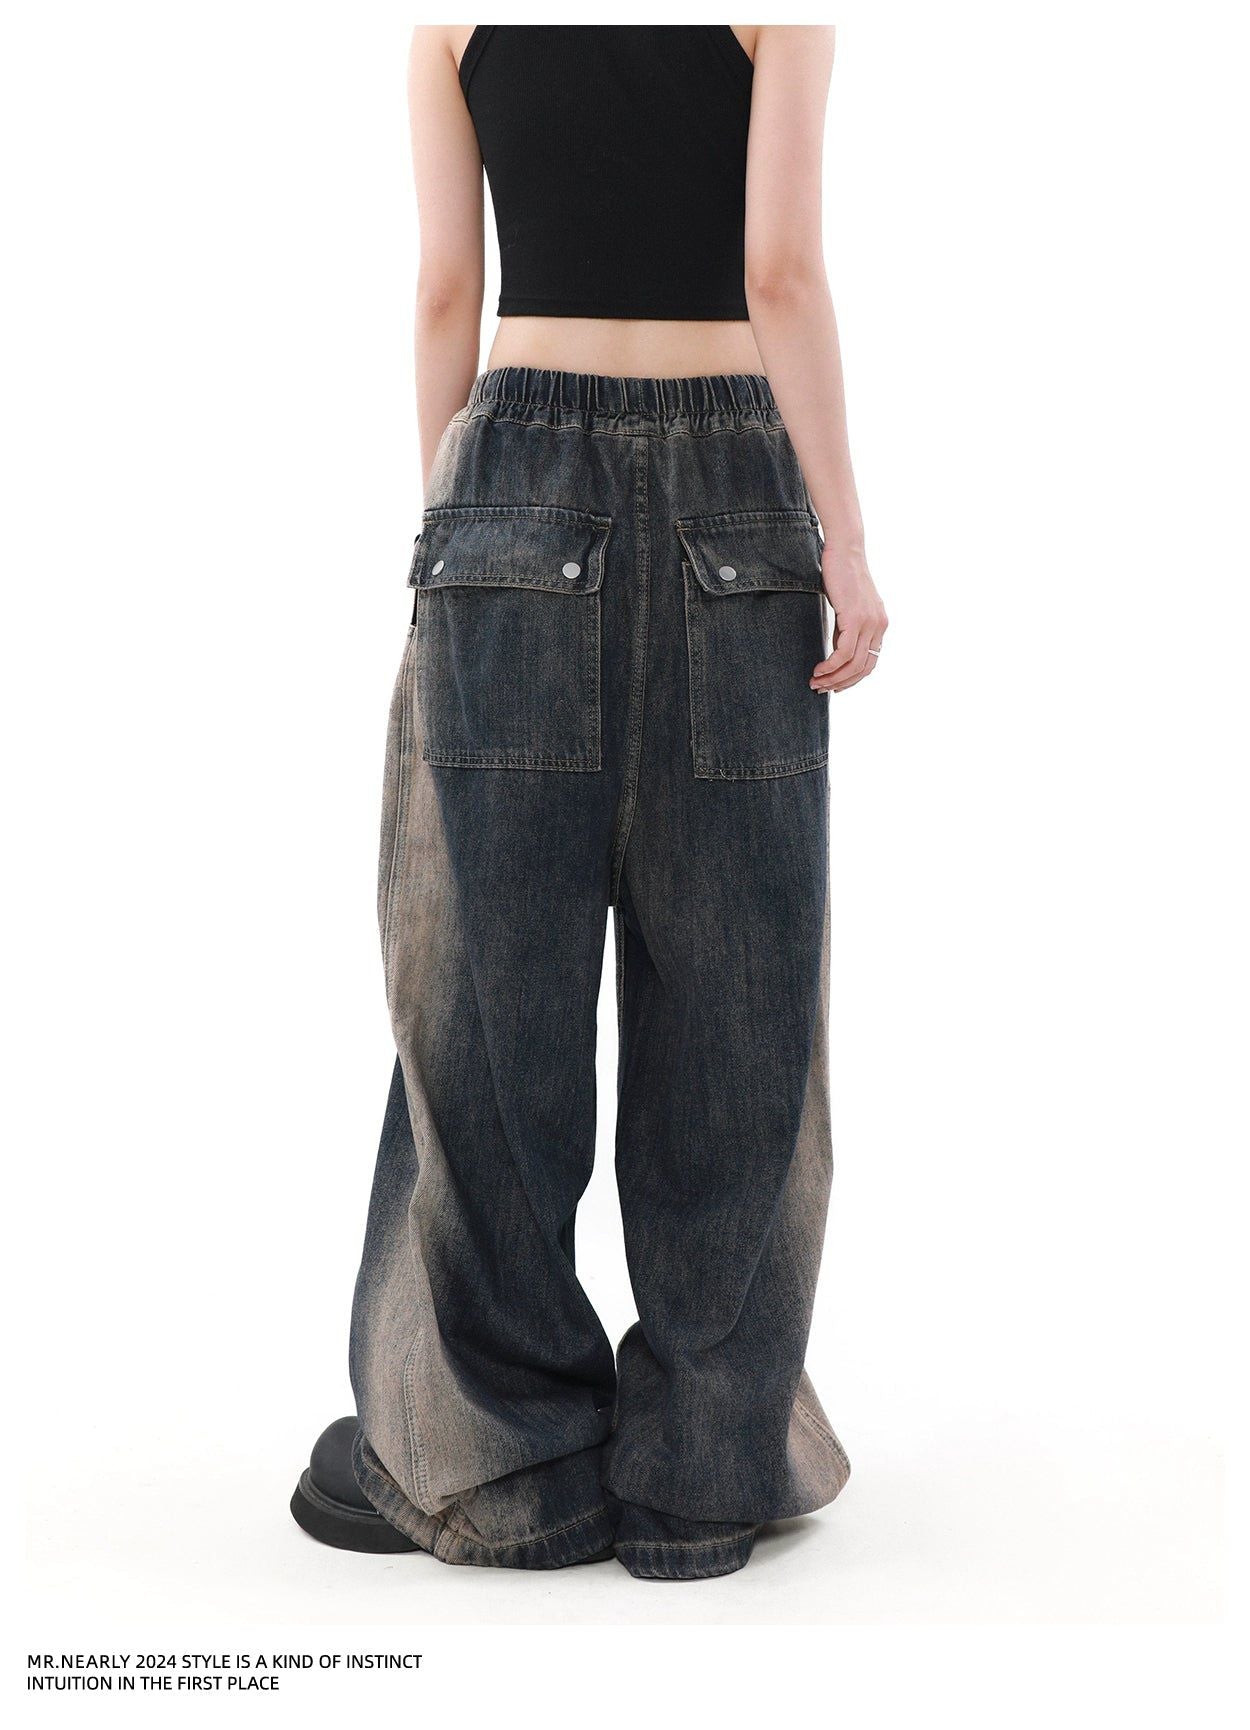 Drawstring Tie-Dyed Jeans Korean Street Fashion Jeans By Mr Nearly Shop Online at OH Vault